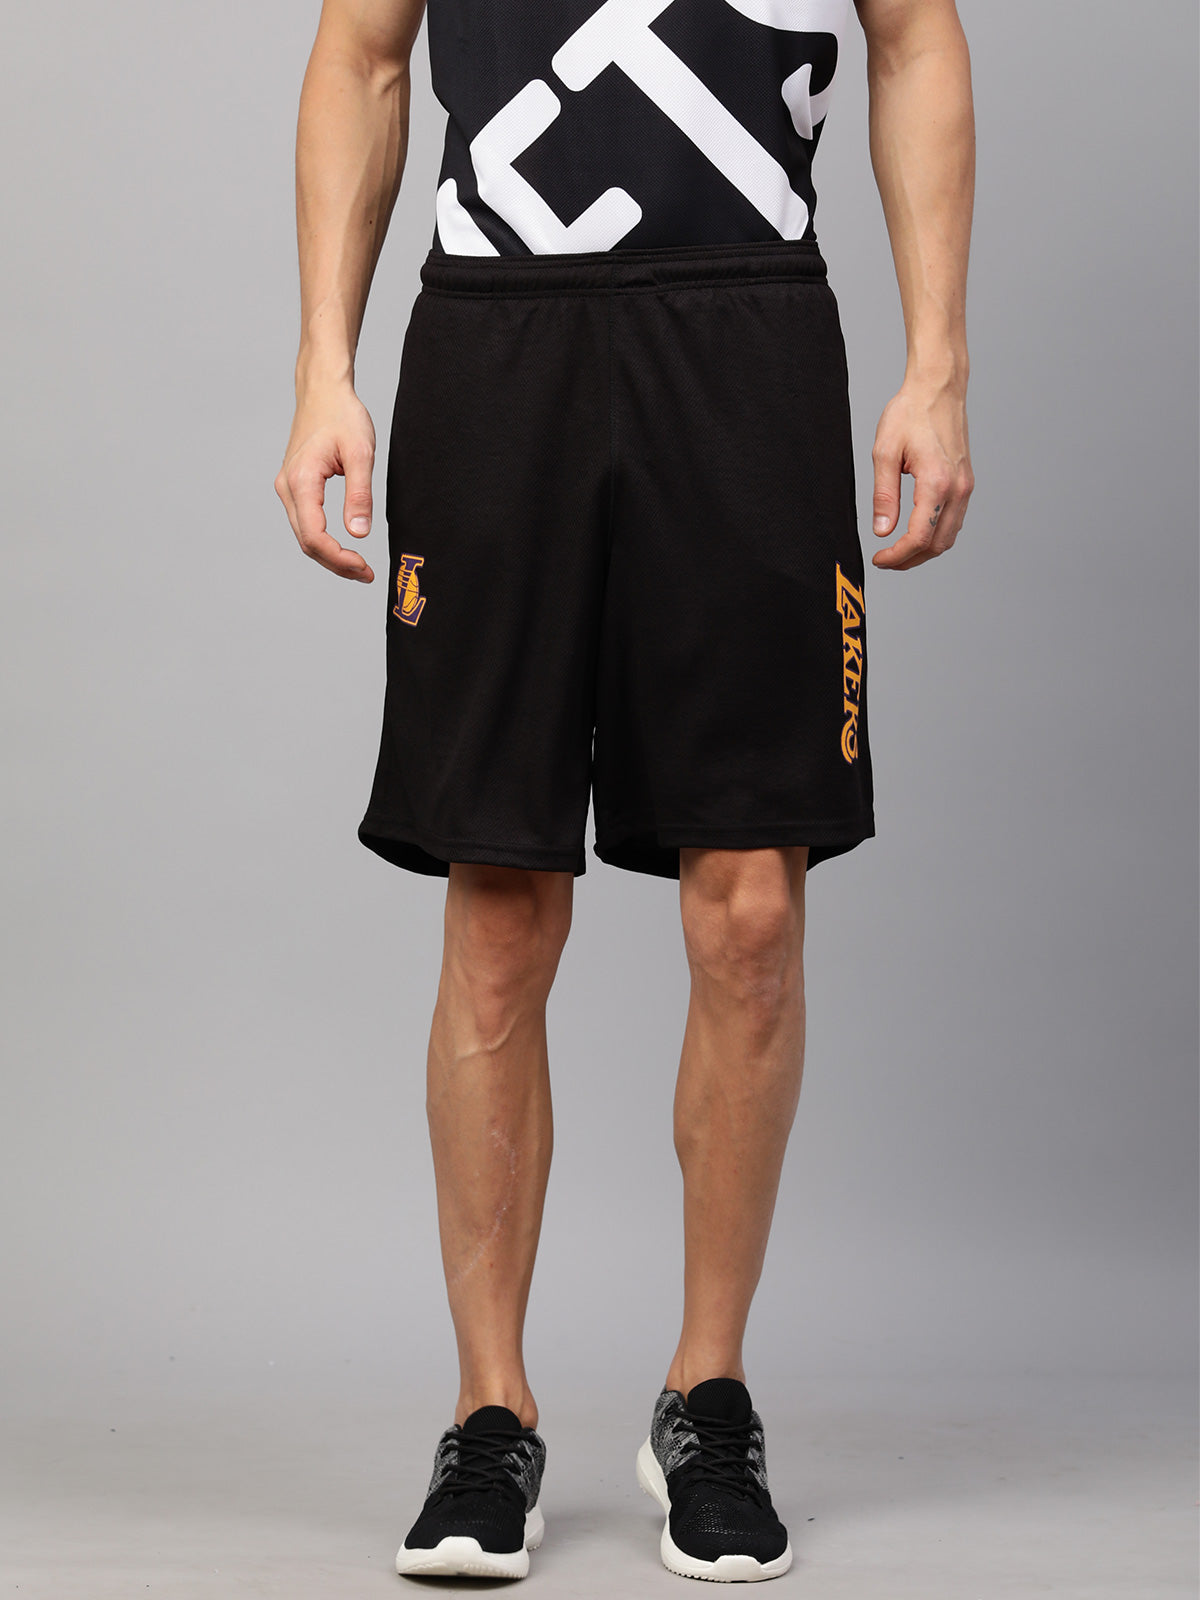 Los Angeles Lakers: Basketball Shorts – Shop The Arena